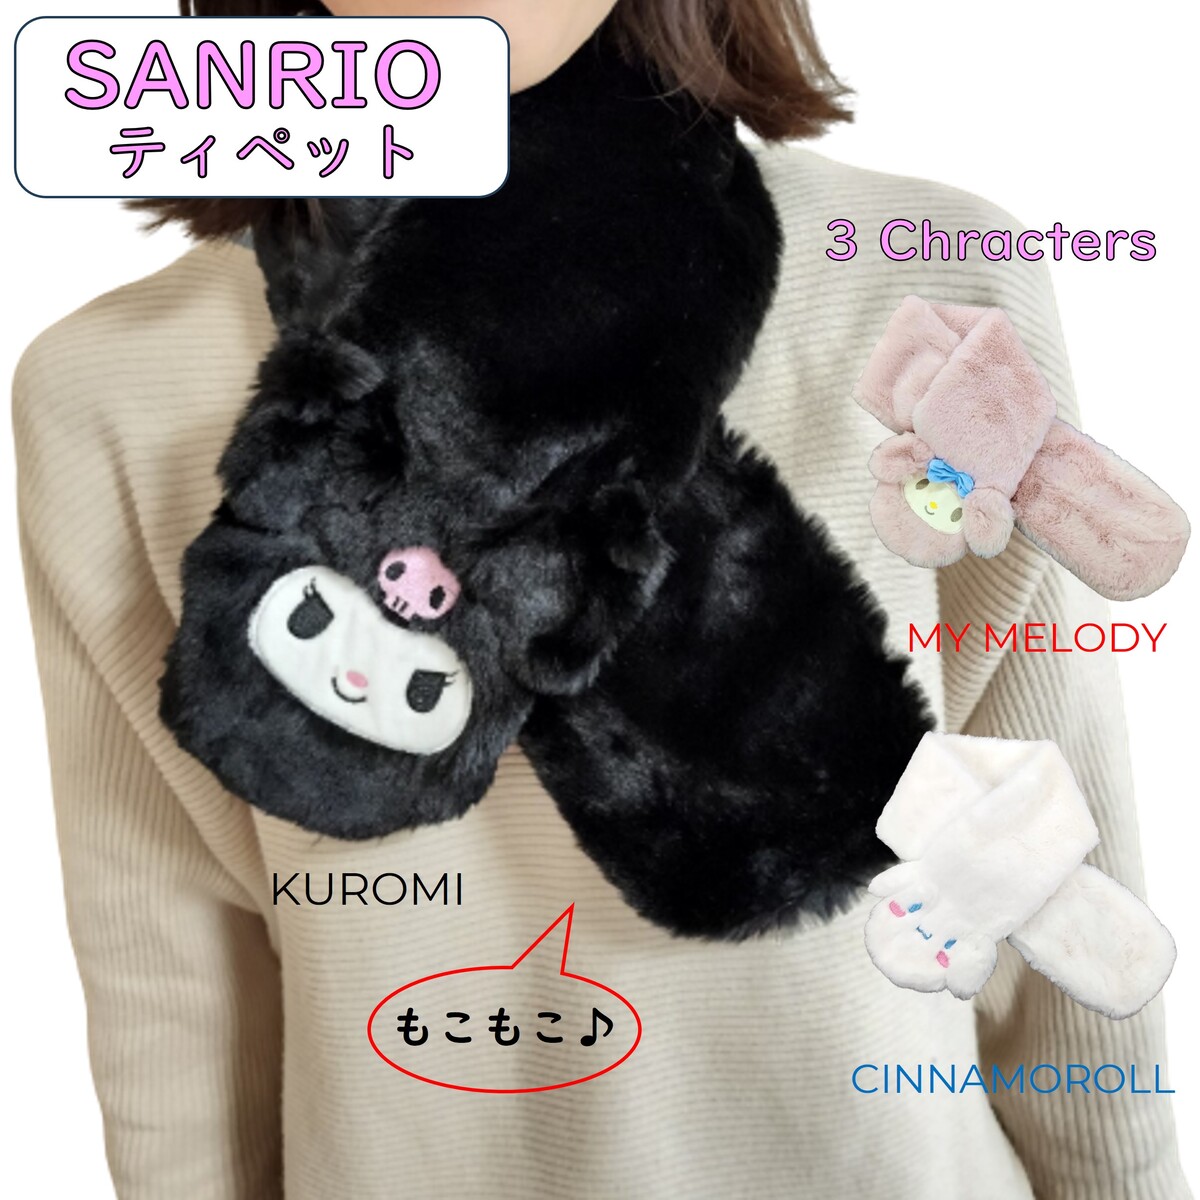  Sanrio tippet muffler adult boa embroidery character 